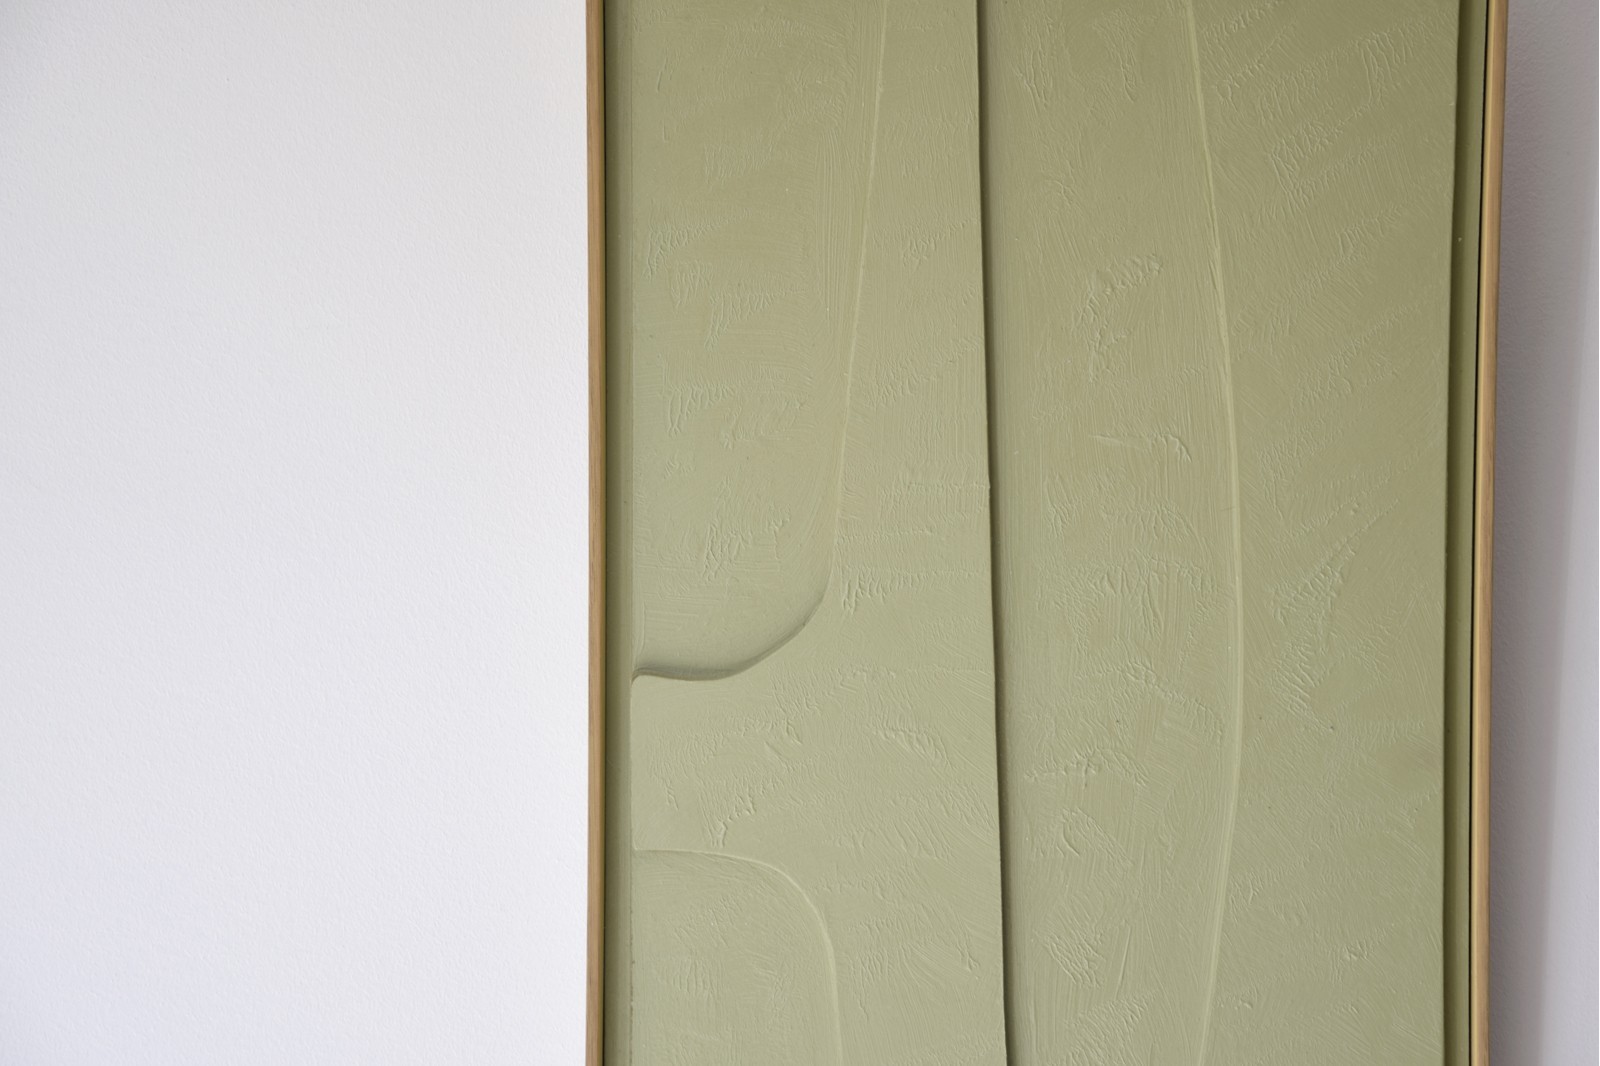 GREEN RELIEF PAINTING N.2